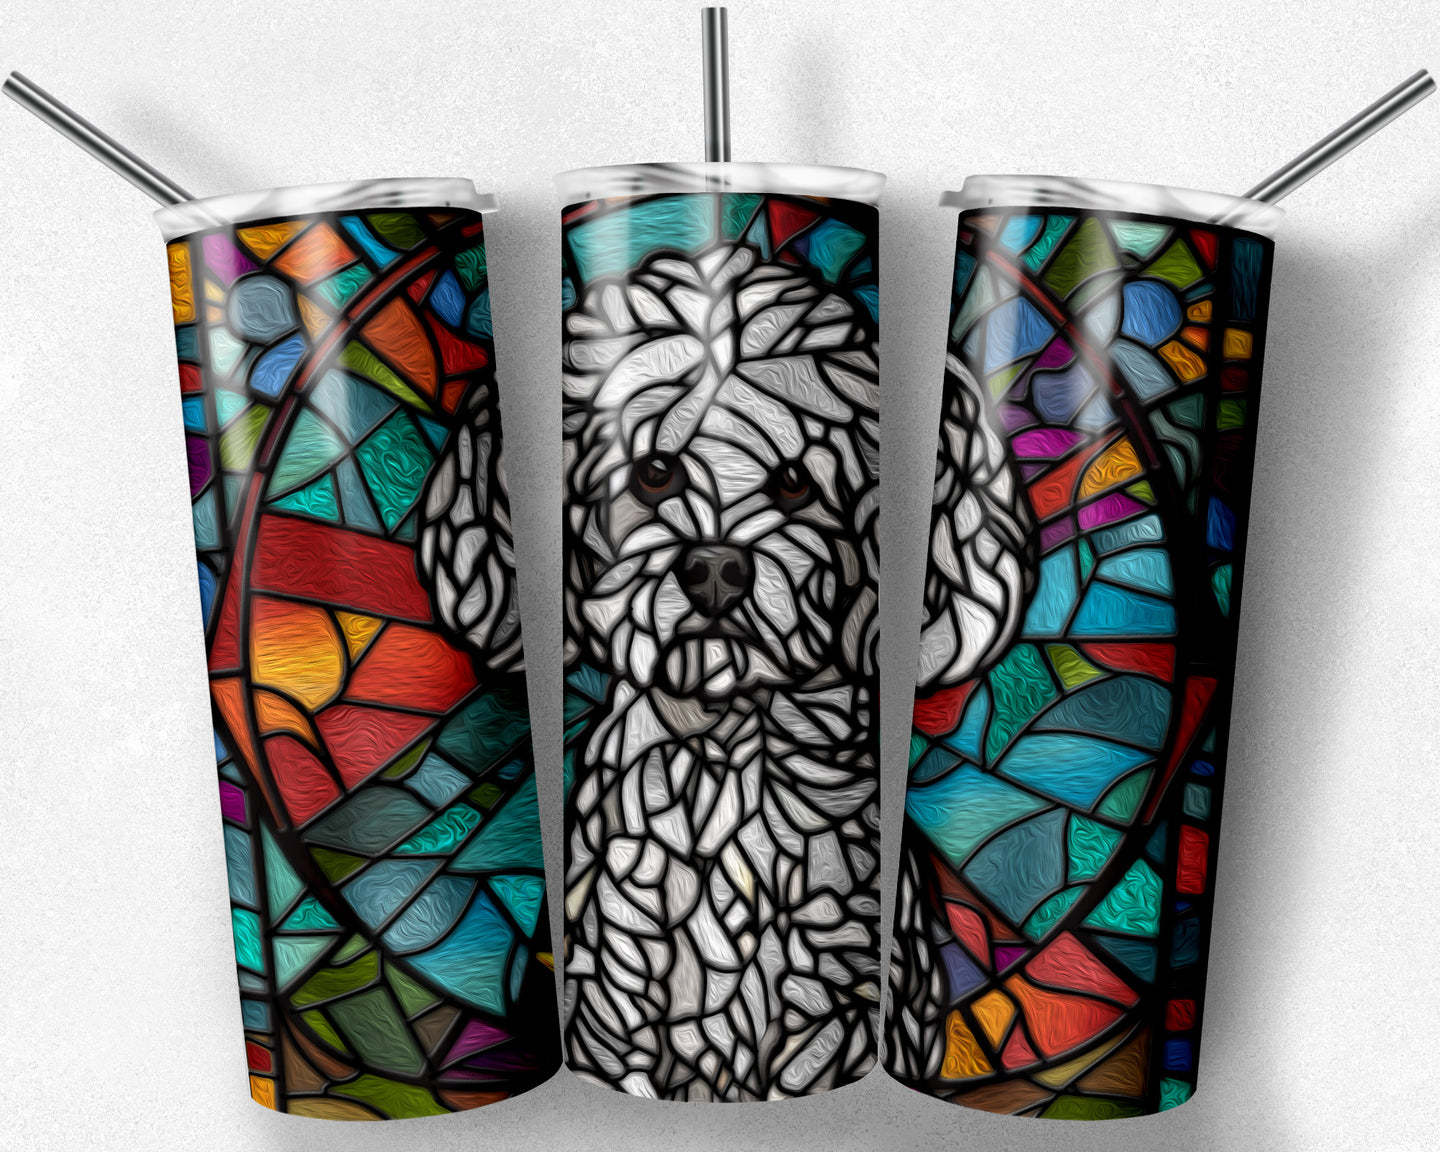 Bichon Frisé stained glass dog